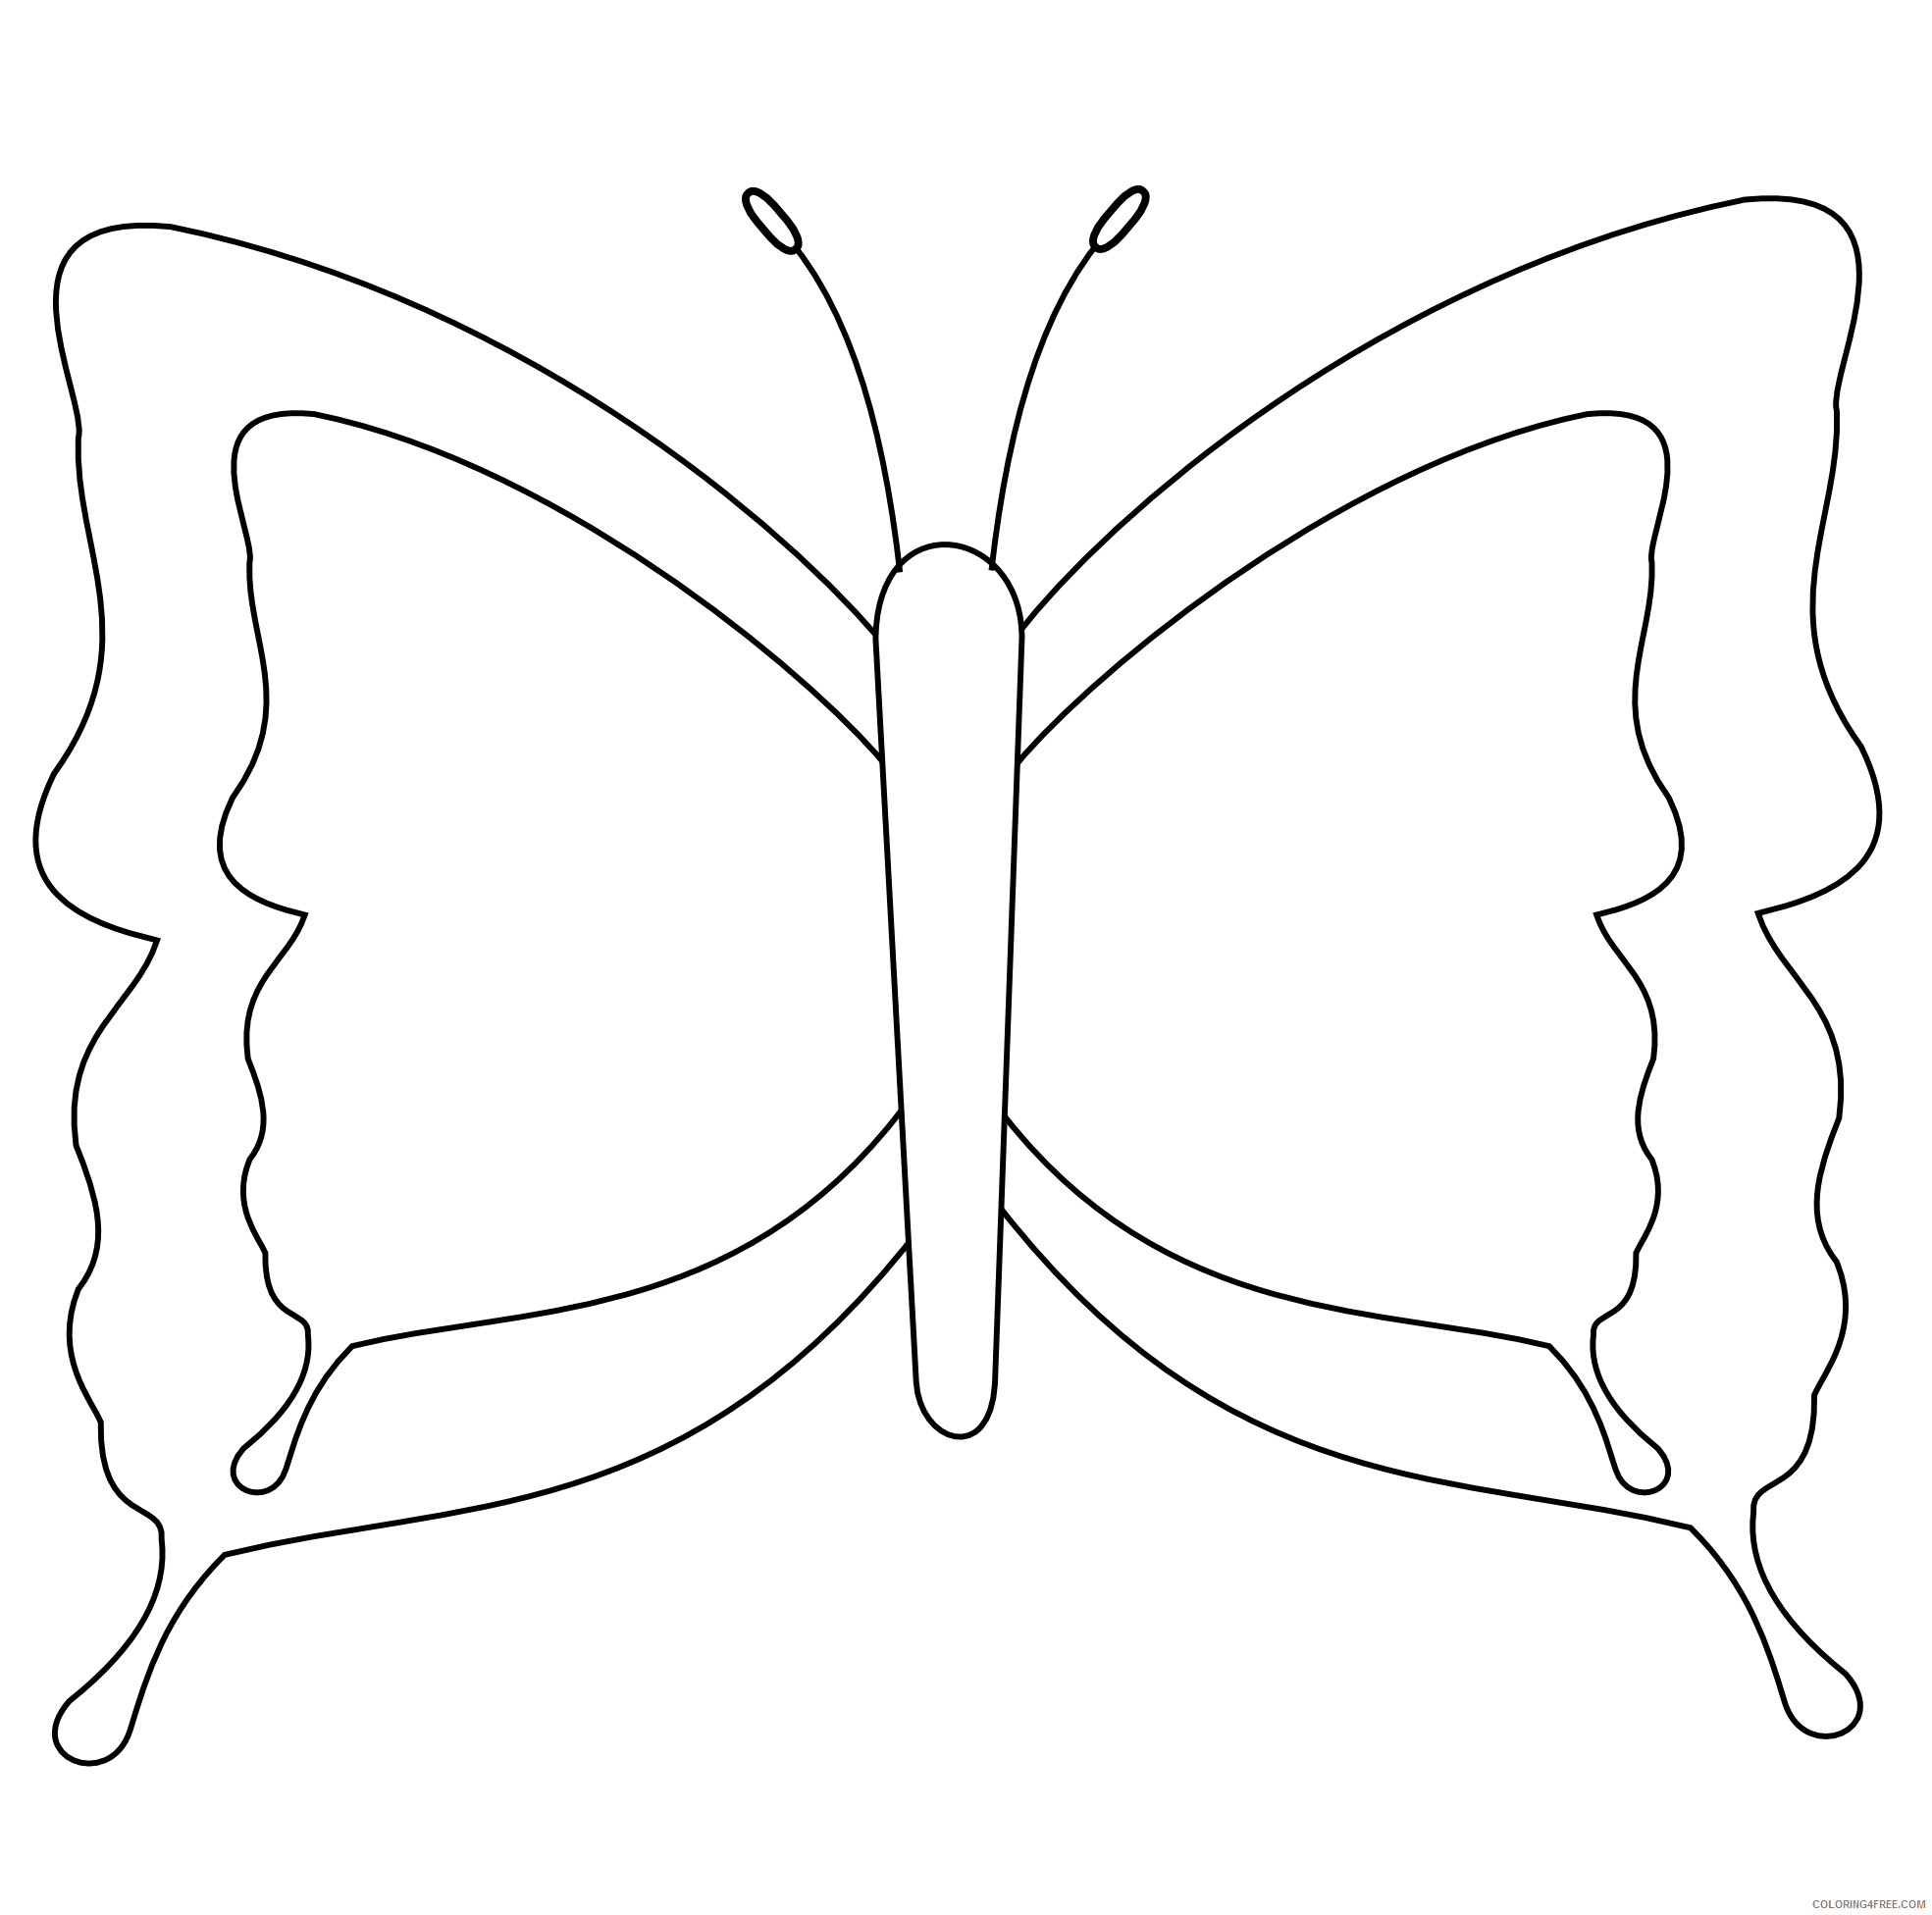 printable-butterfly-template-cut-out-printables-template-free